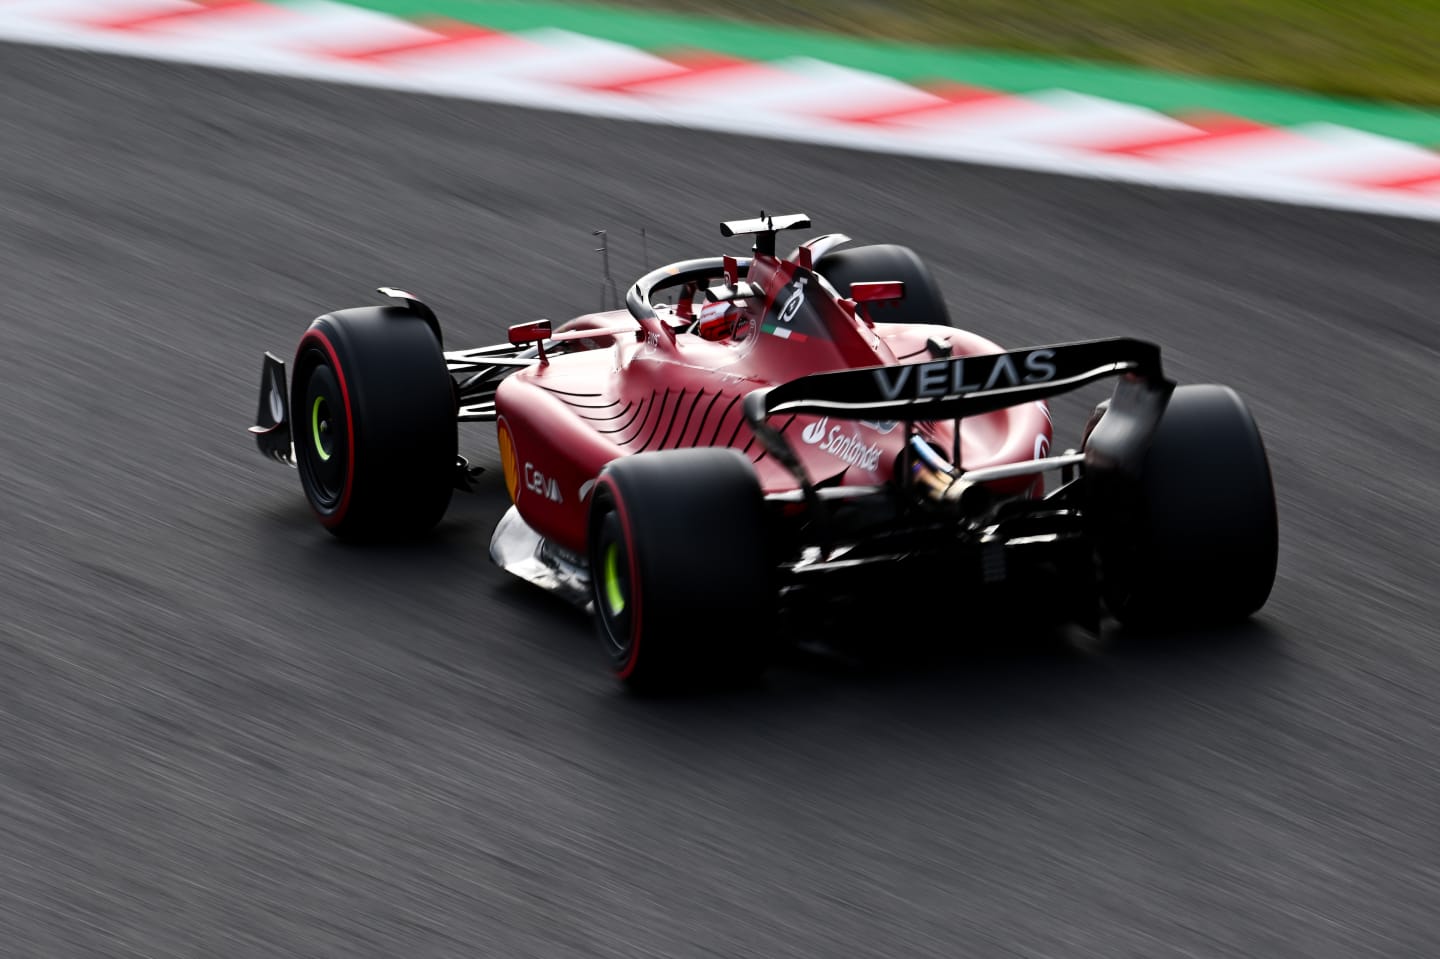 SUZUKA, JAPAN - OCTOBER 08: Charles Leclerc of Monaco driving the (16) Ferrari F1-75 on track during qualifying ahead of the F1 Grand Prix of Japan at Suzuka International Racing Course on October 08, 2022 in Suzuka, Japan. (Photo by Clive Mason/Getty Images)